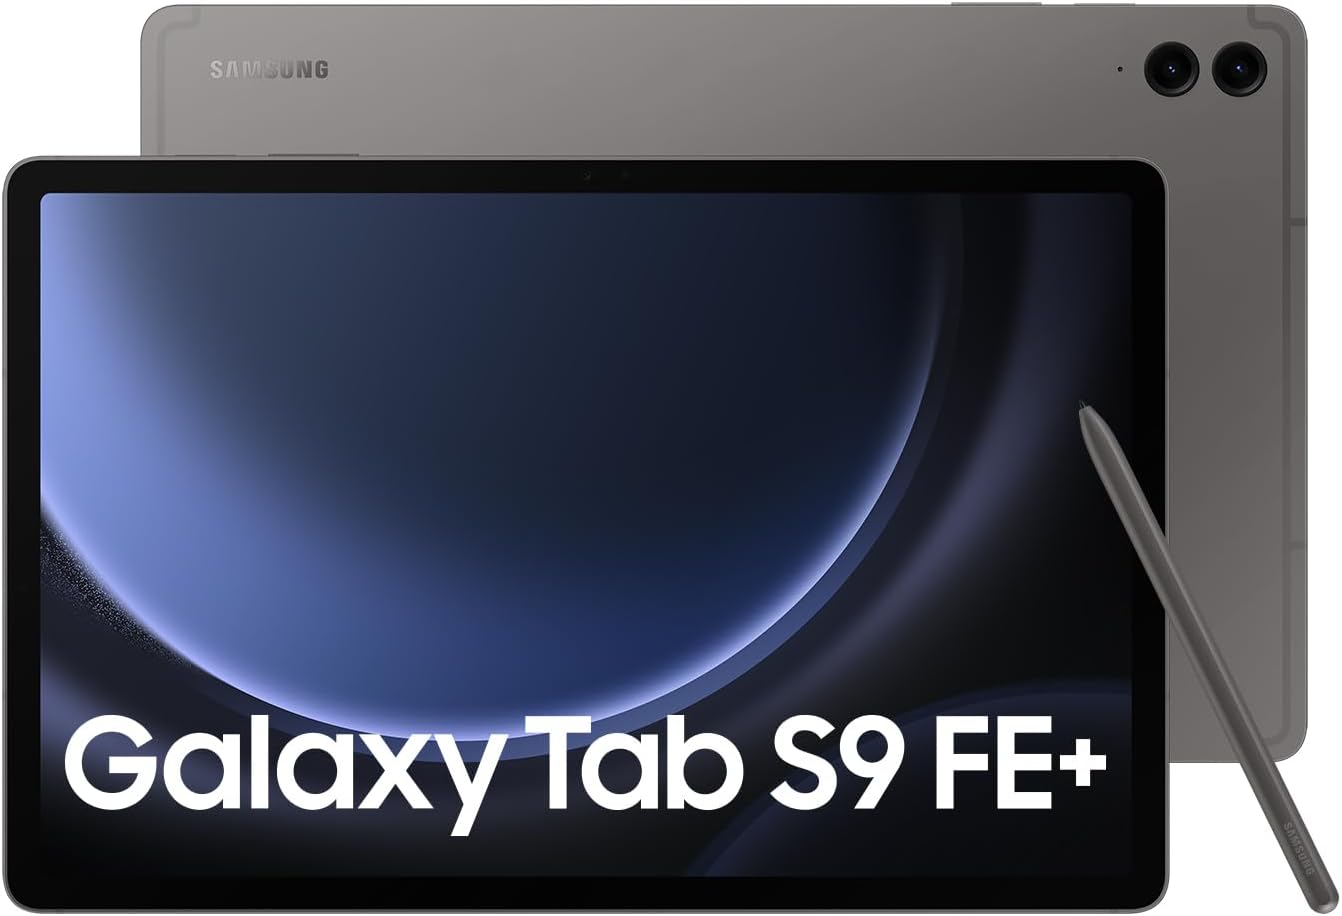 Samsung Galaxy Tab S9 FE+ 12.4 Gray Tablet - Vibrant design for creative possibilities and entertainment. 8806095159386